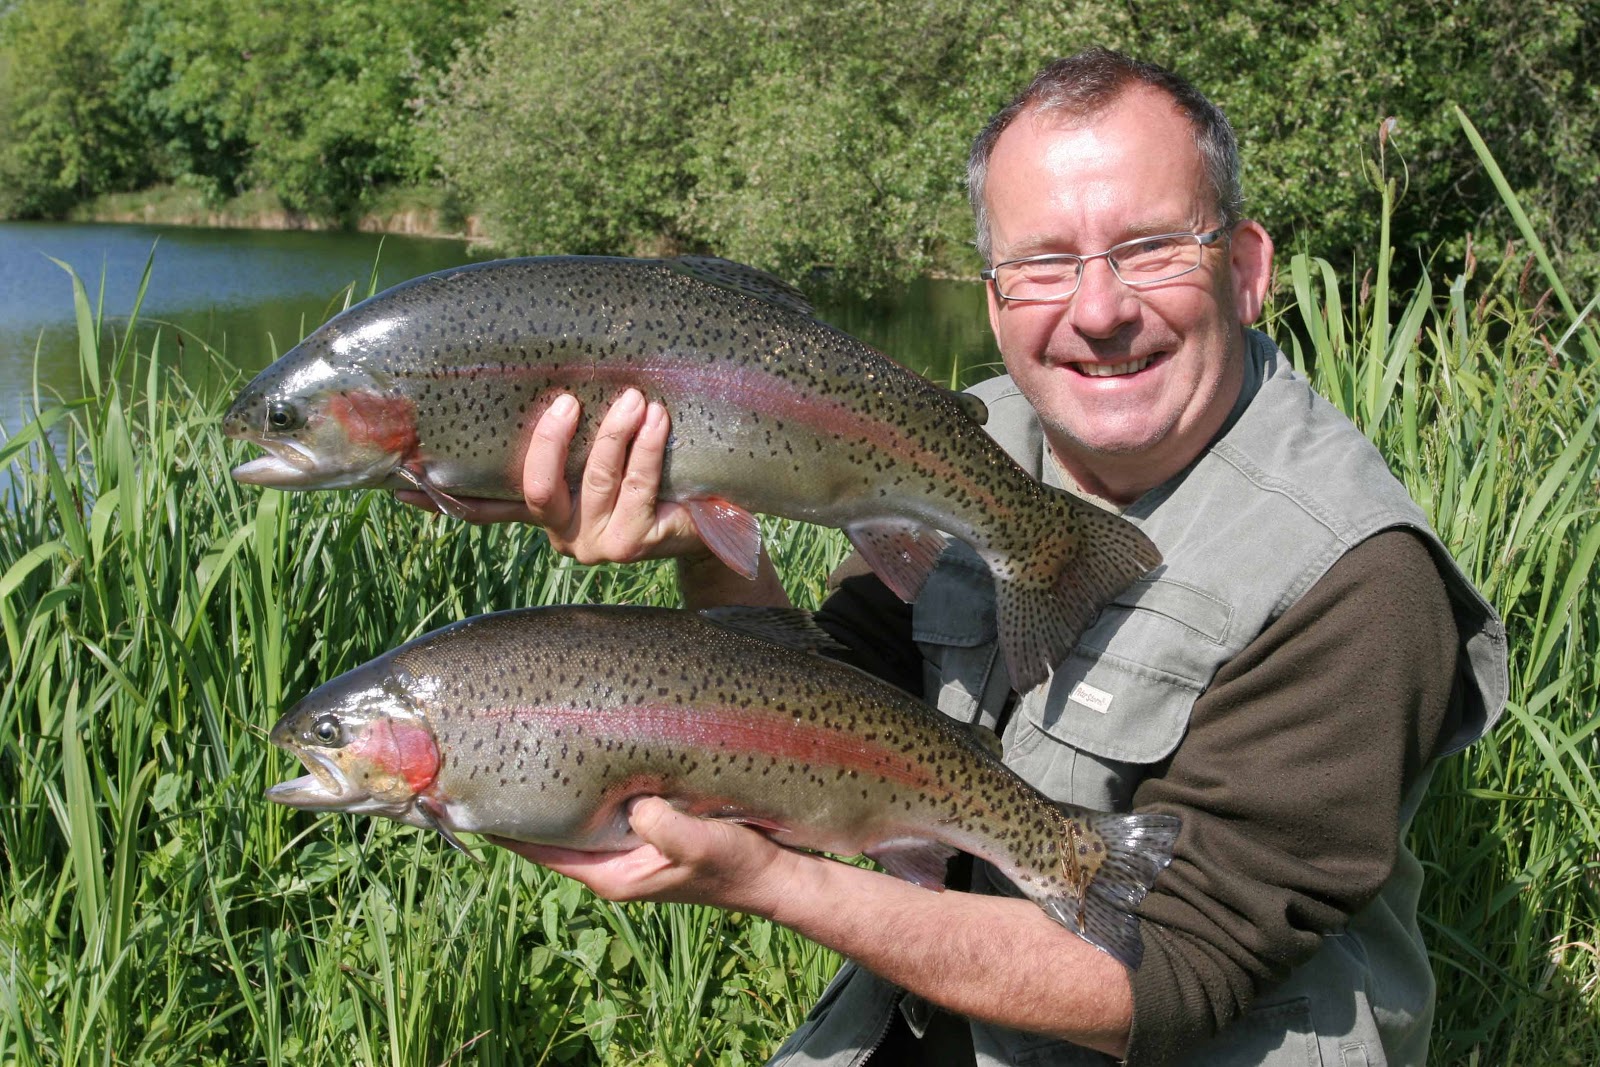 duncan-charmans-world-of-angling-casting-a-fly-avington-trout-fishery